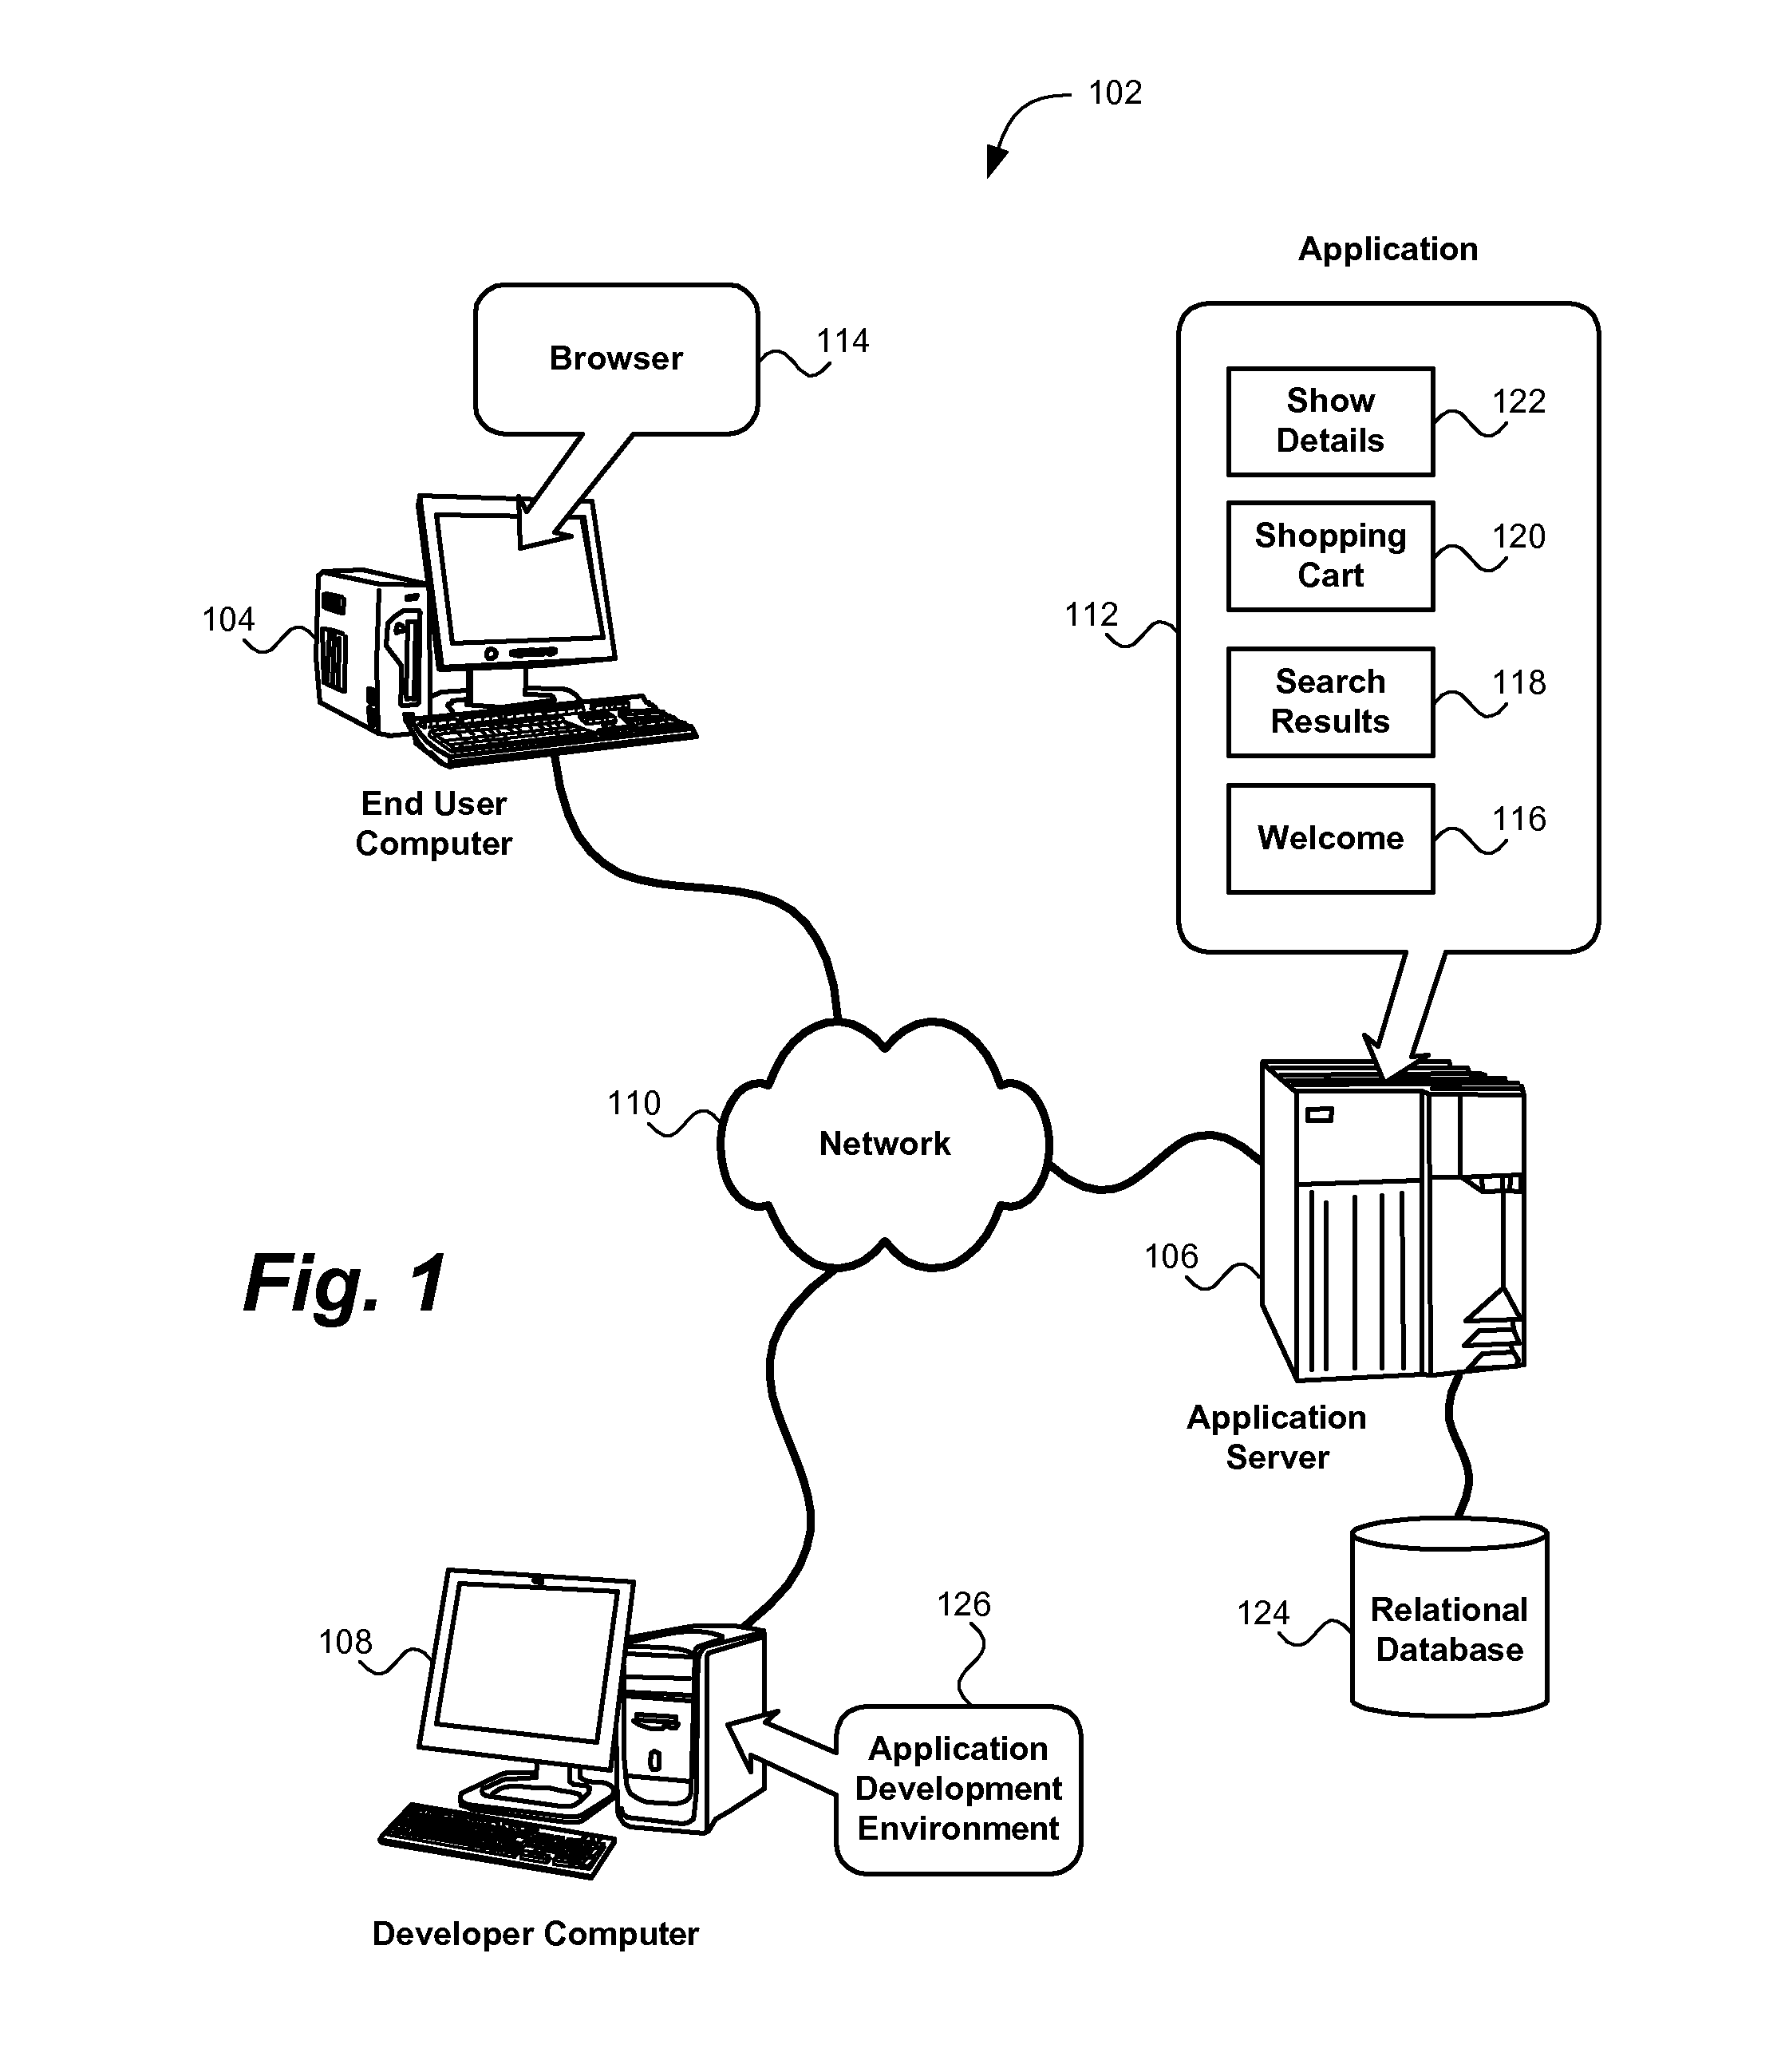 Enabling multi-view applications based on a relational state machine paradigm